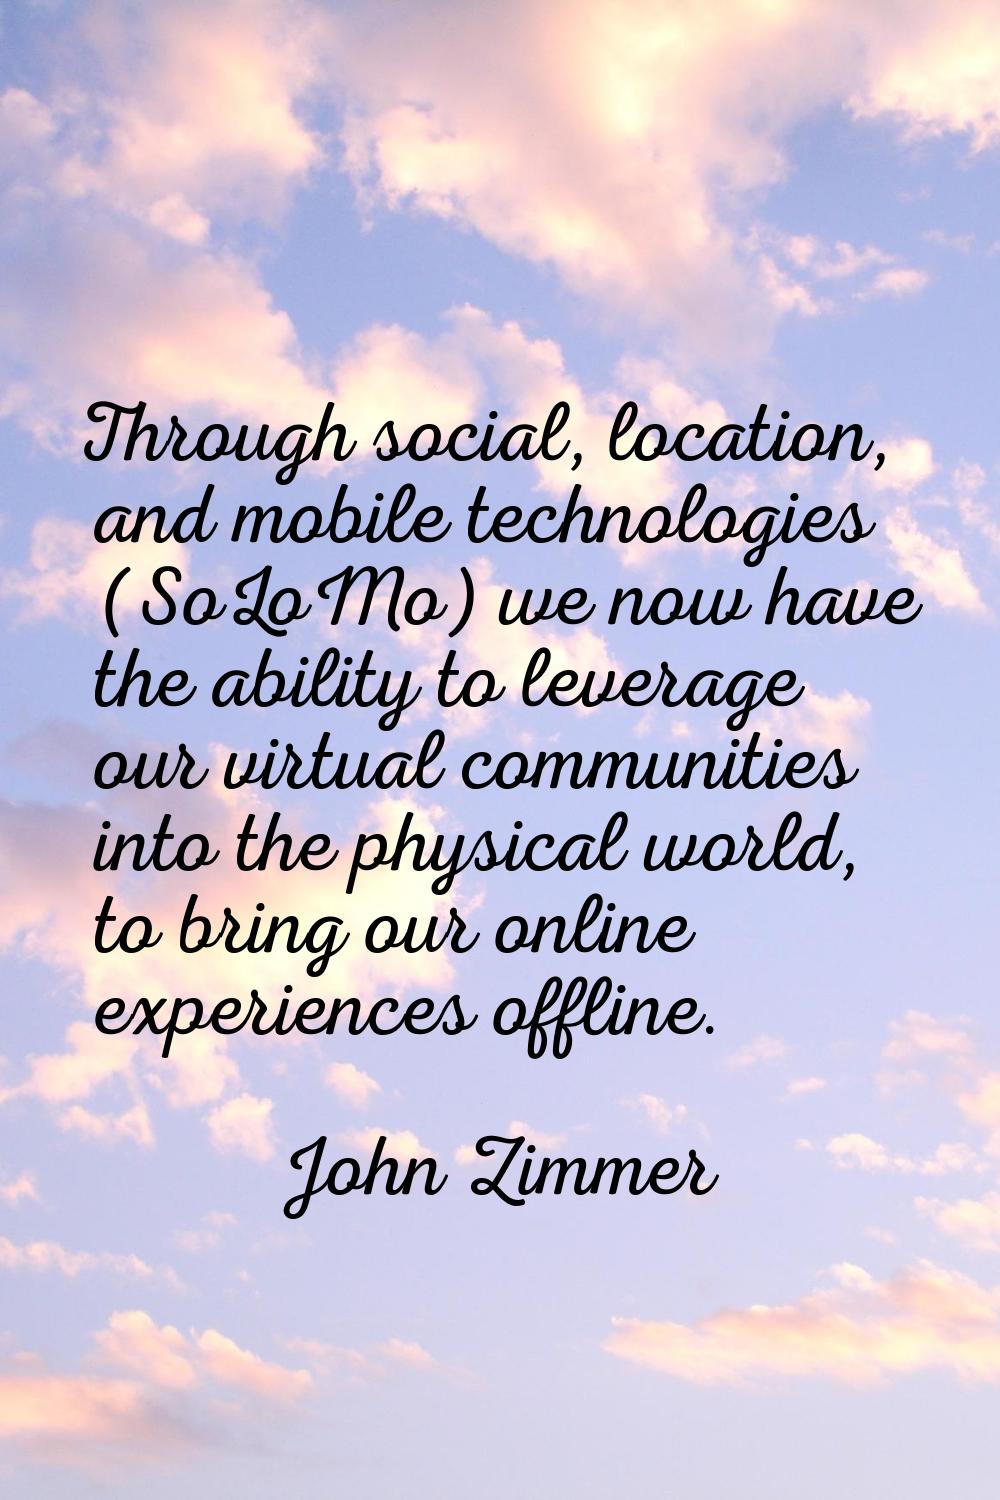 Through social, location, and mobile technologies (SoLoMo) we now have the ability to leverage our 